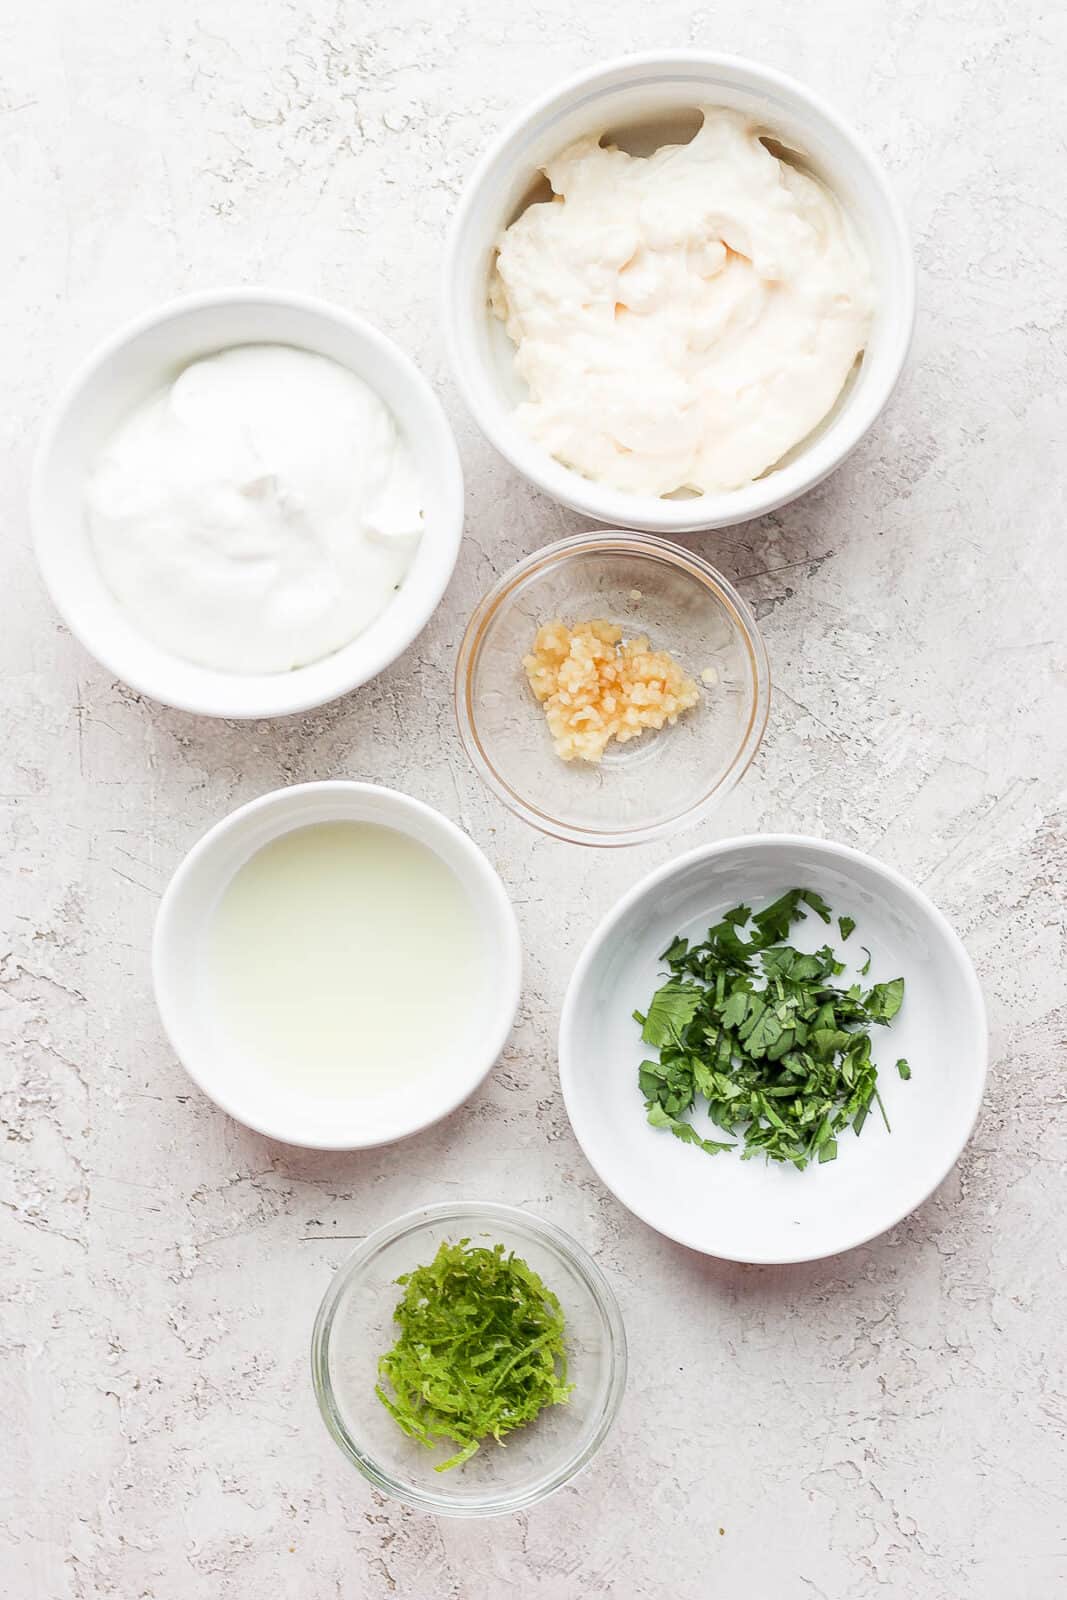 Ingredients for cilantro lime crema in separate bowls.